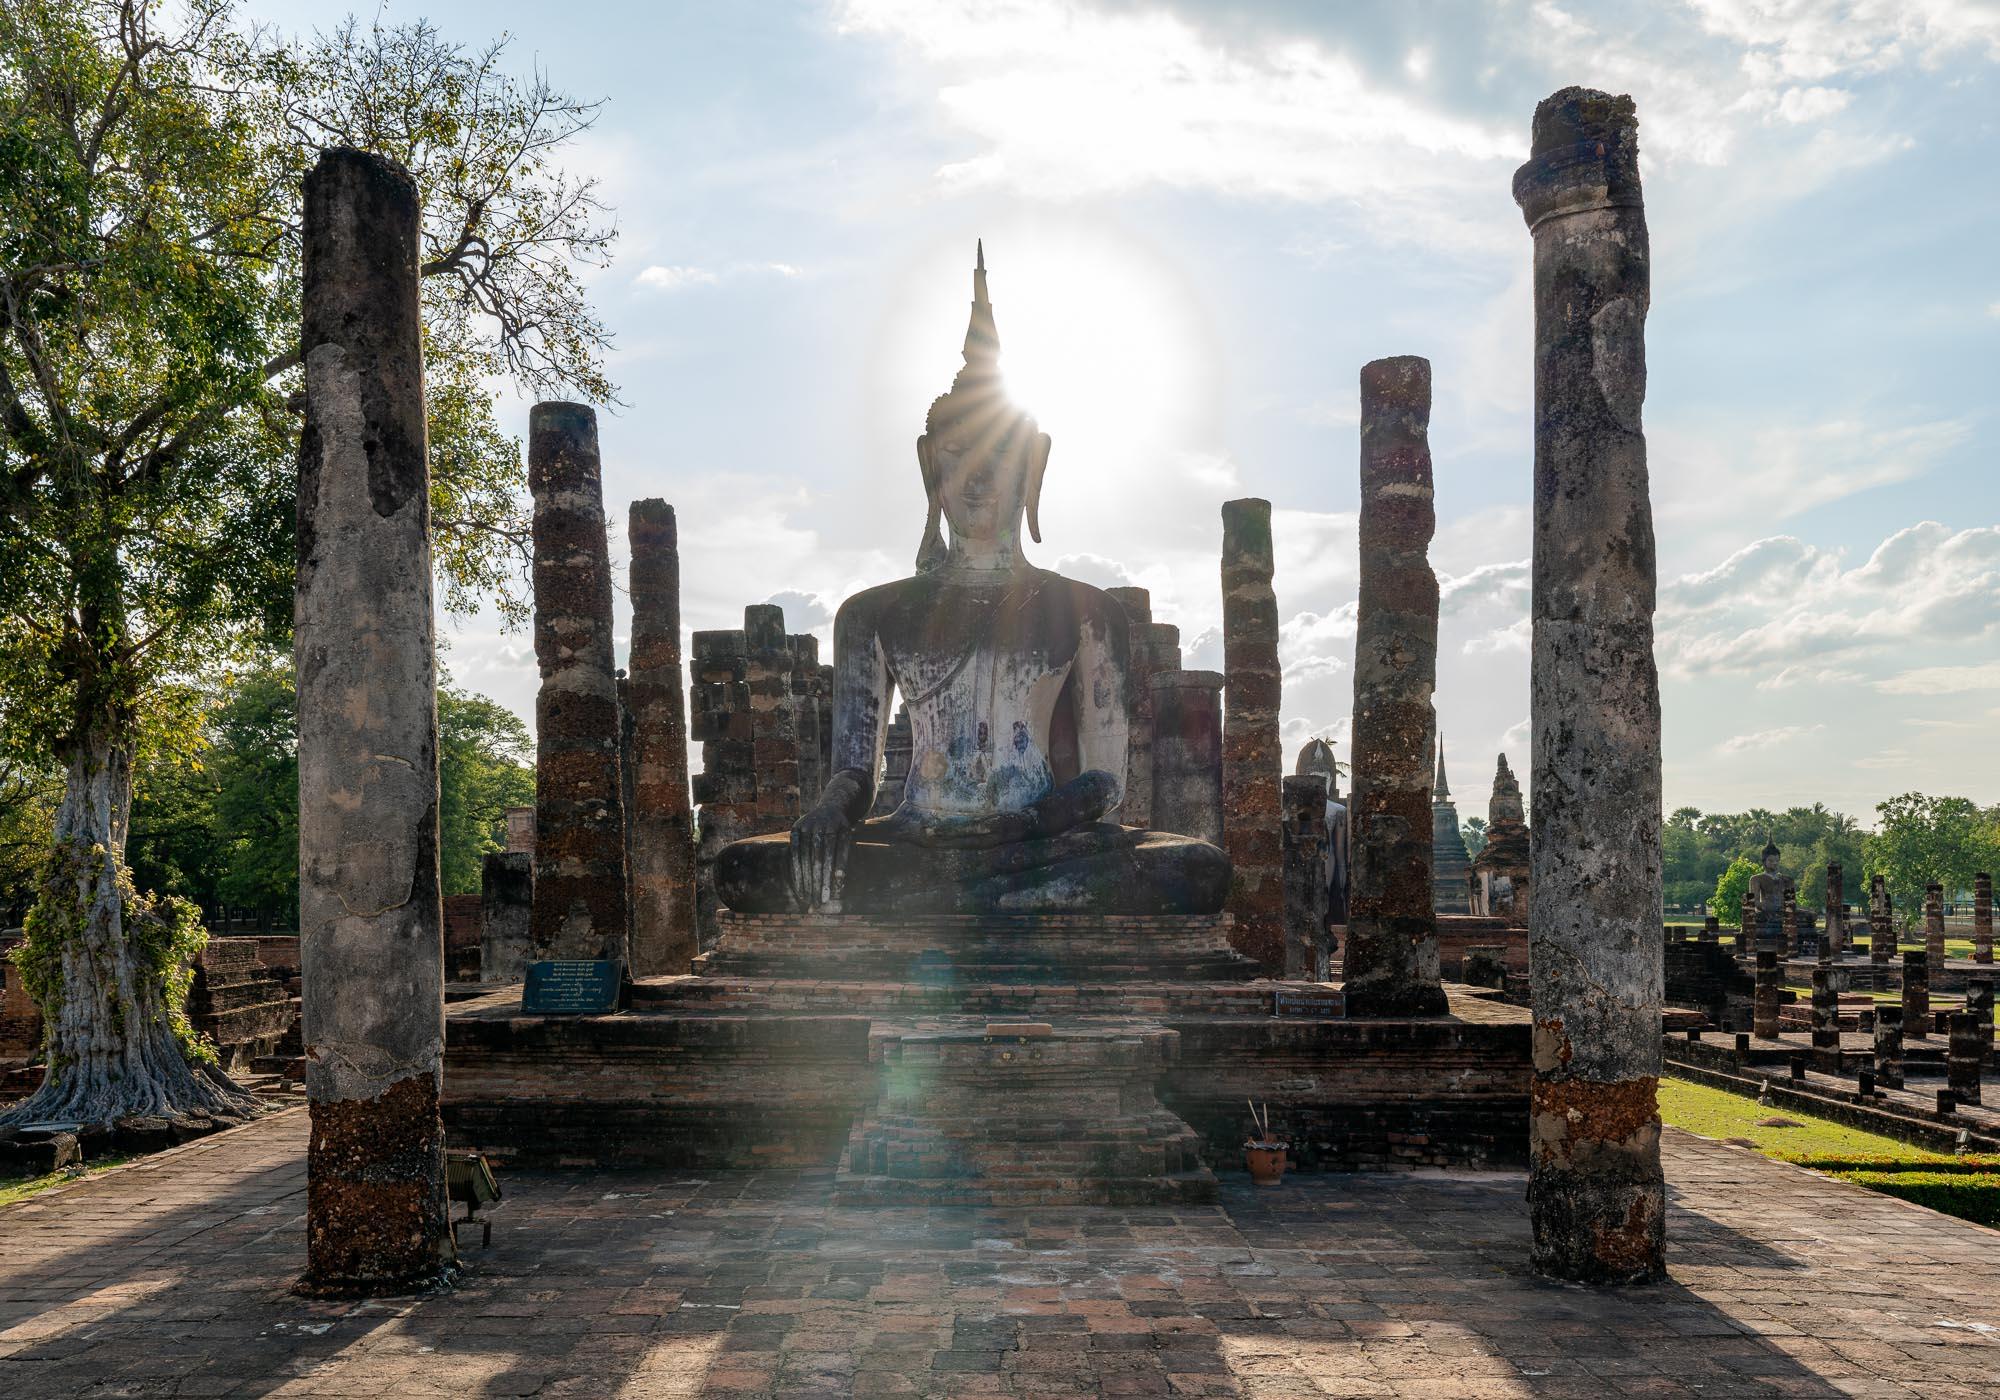 One of the important Buddha statues along the main axis of Wat Mahathat, with the sun setting in the background. – © Michael Turtle